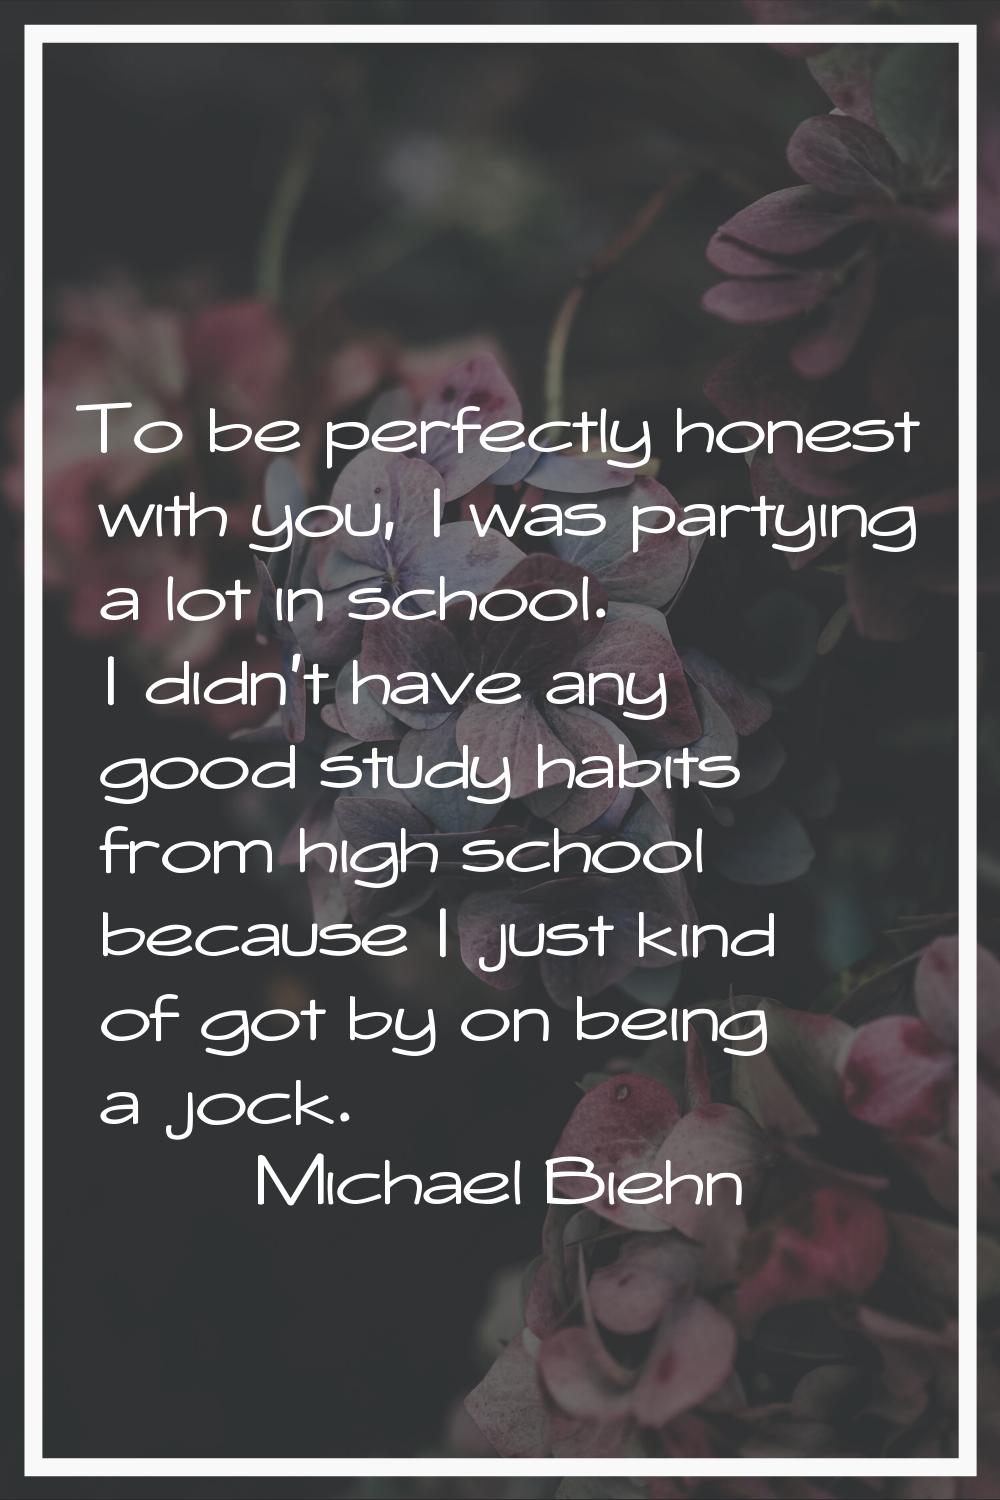 To be perfectly honest with you, I was partying a lot in school. I didn't have any good study habit